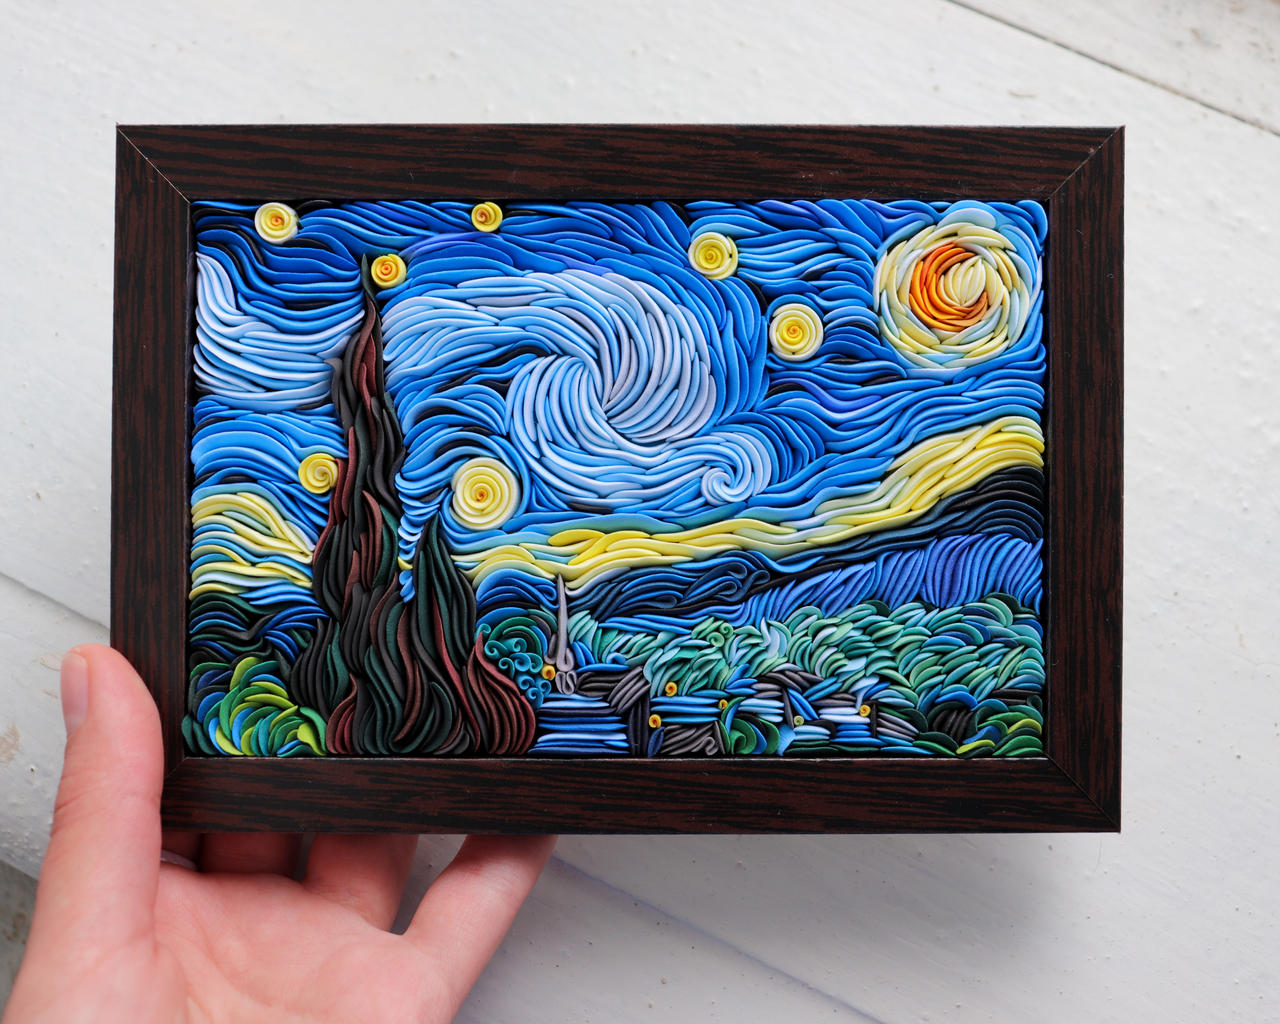 How to Make a Starry Night by Painting with Clay